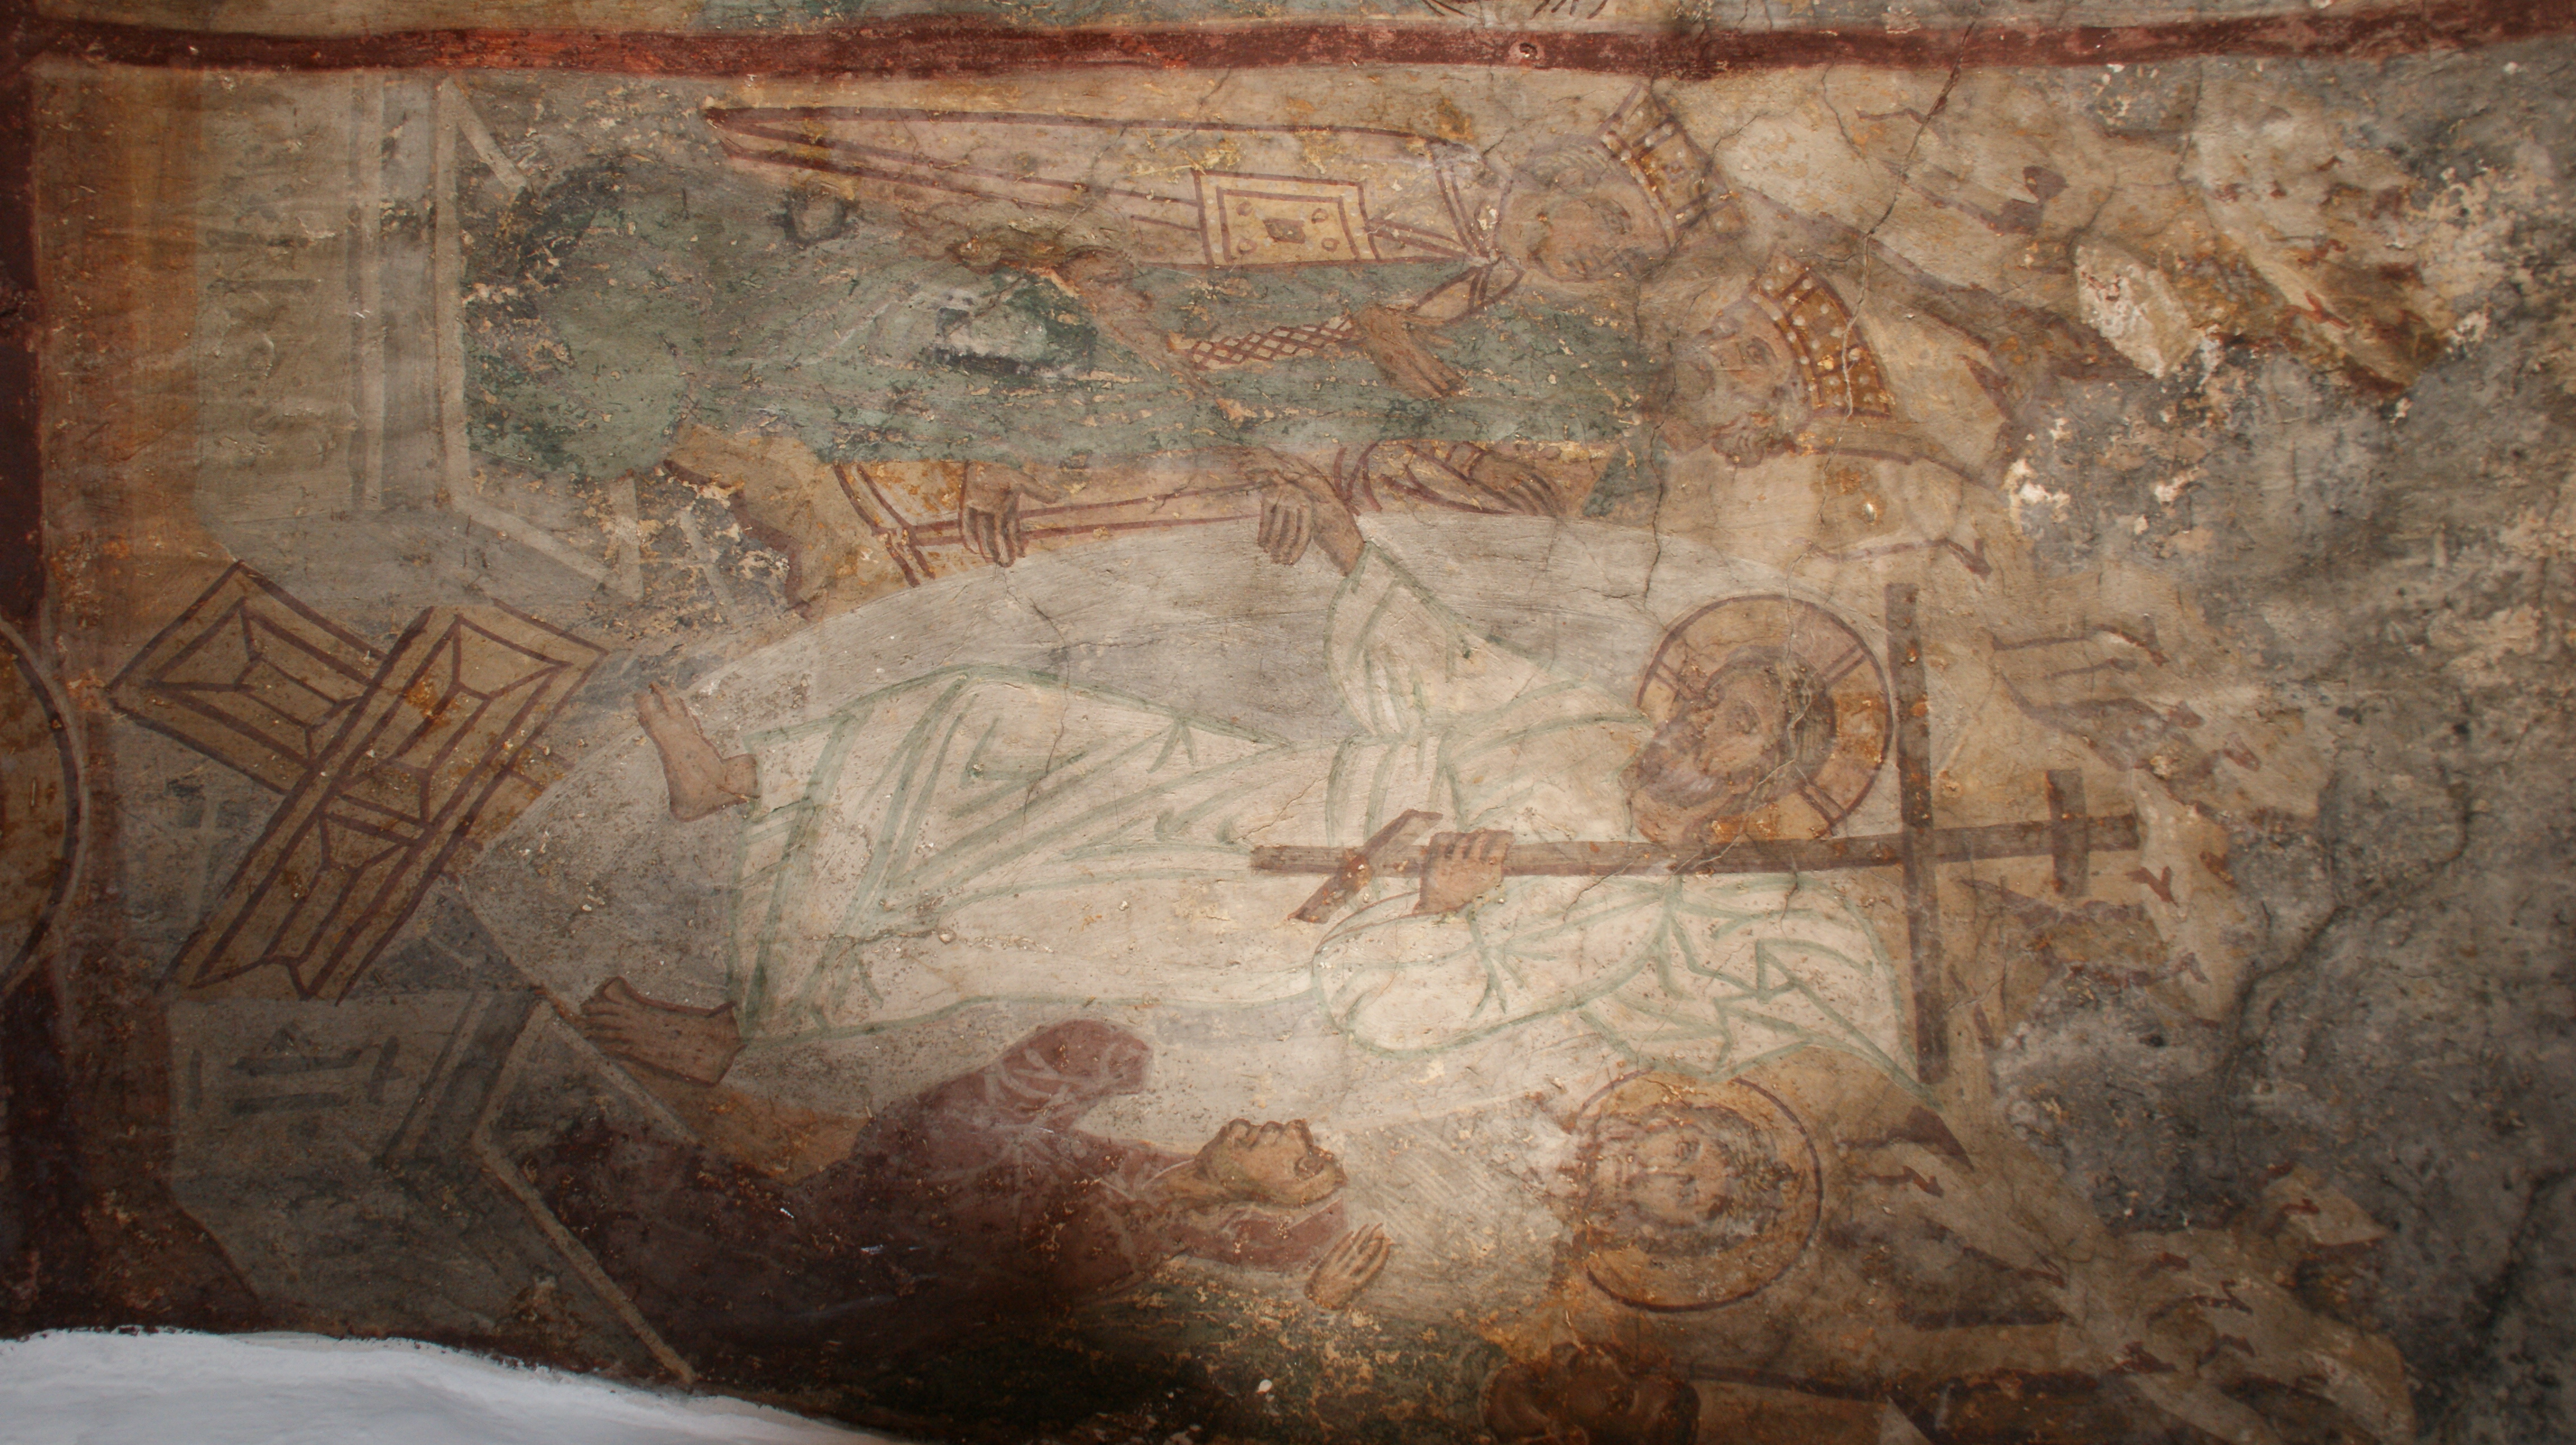 The depiction of the Descent into Limbo, south wall (naos), St. Prokopios, Symi (source: M. Asfentagakis).